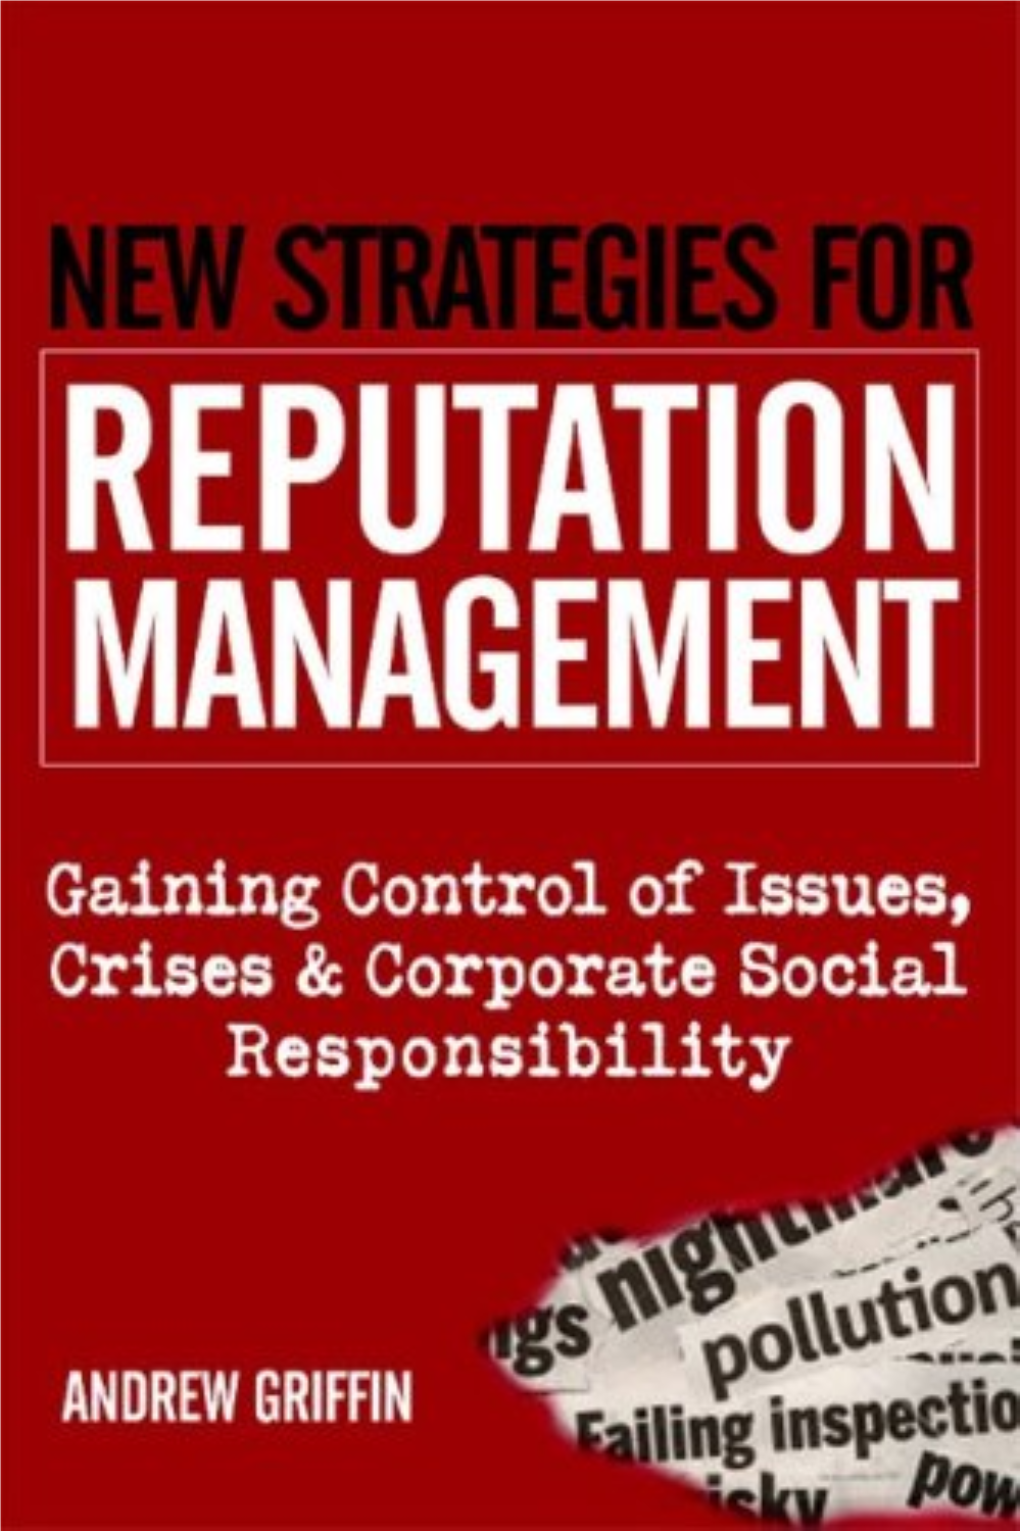 REPUTATION MANAGEMENT Gaining Control of Issues, Crises & Corporate Social Responsibility